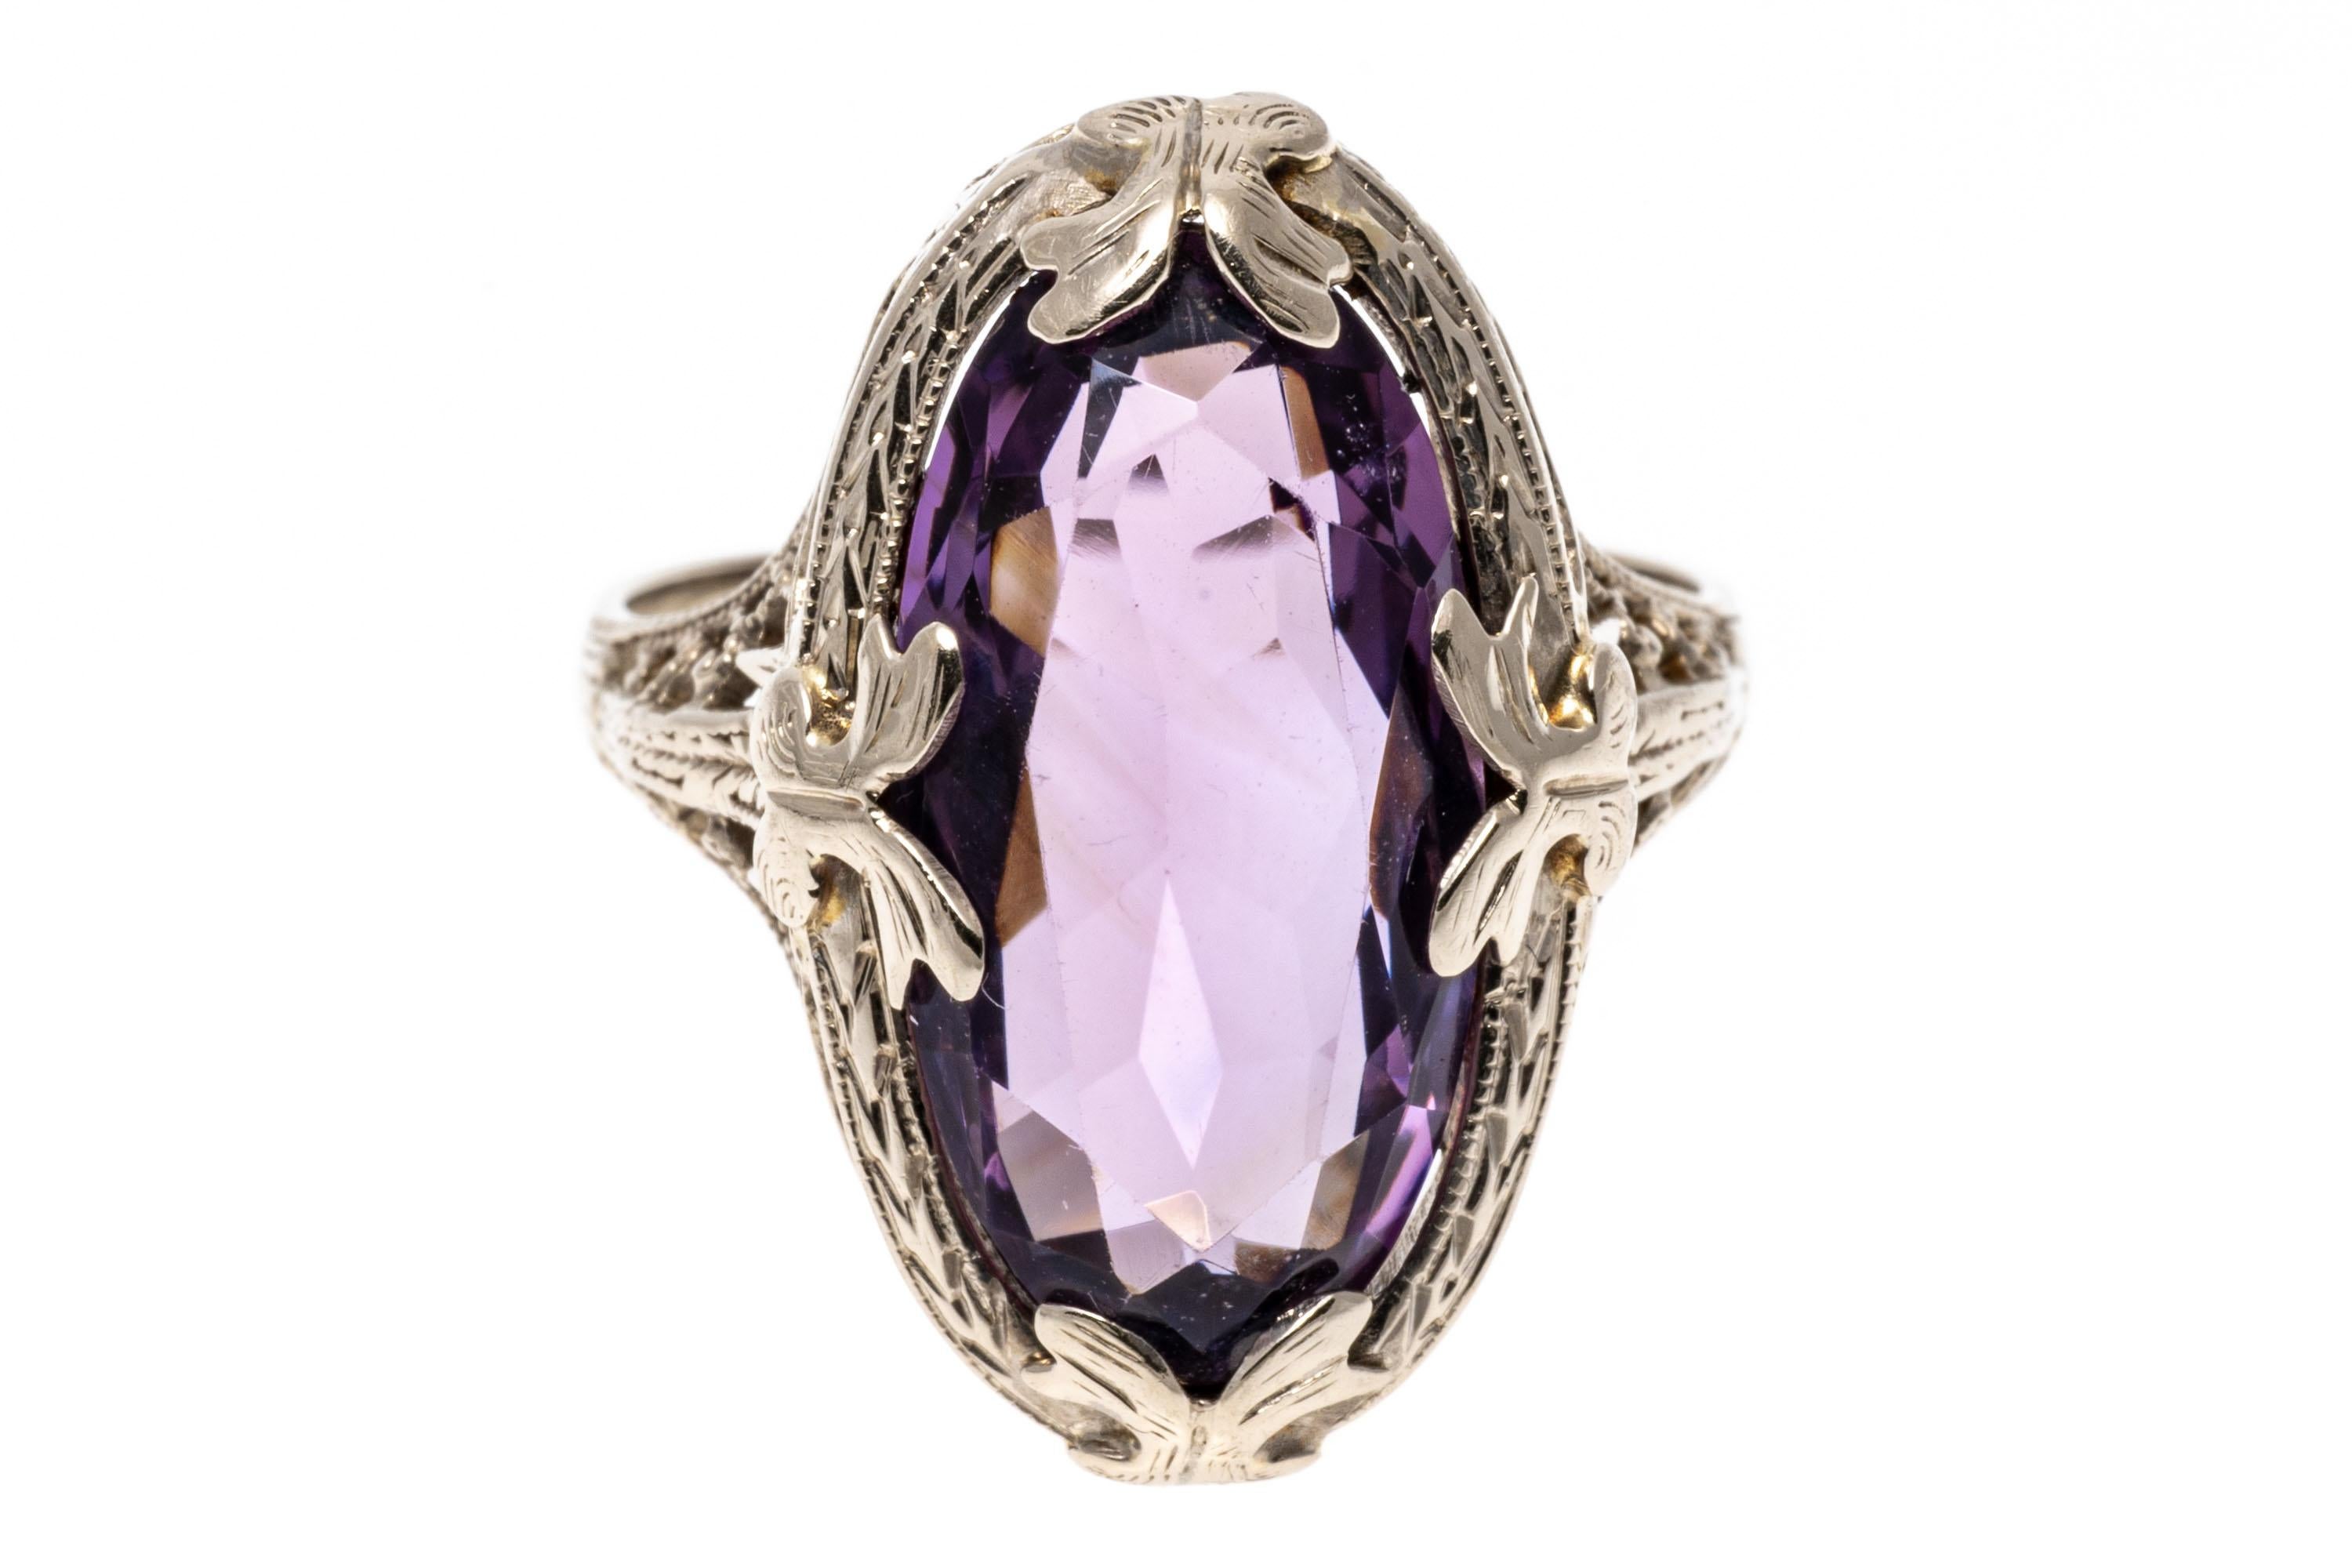 14k white gold ring. This pretty vintage ring is an elongated oval faceted, medium to light purple color amethyst, approximately 5.50 CTS and set with foliate prongs, with a filigree style gallery and shoulders.
Marks: 14k
Dimensions: 7/16